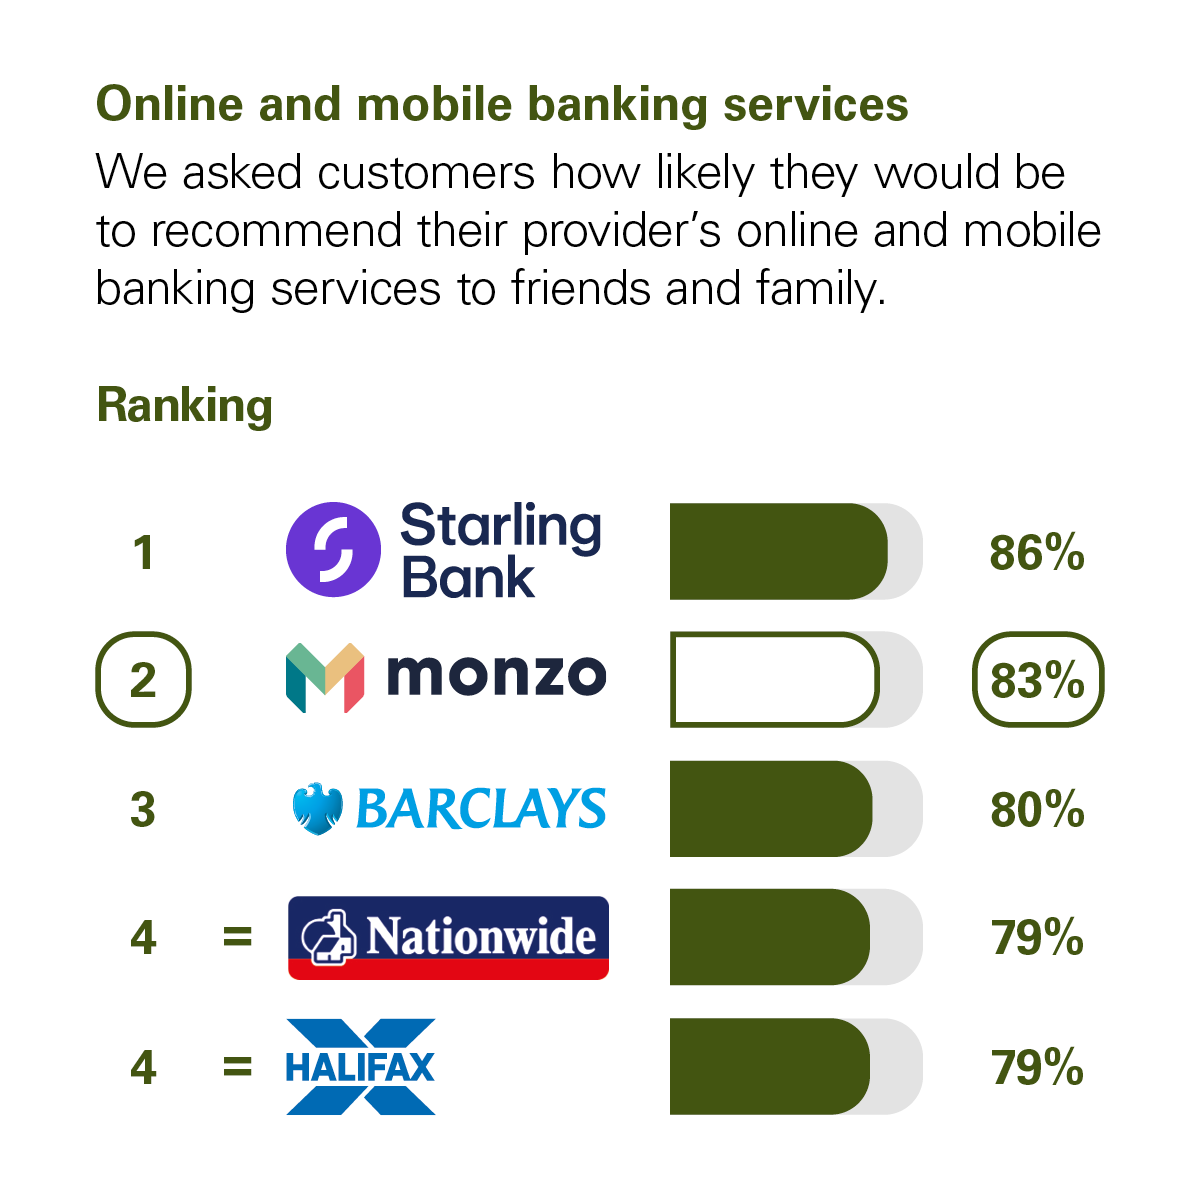 Graph showing the results of the CMA scoring of UK banks in the Online and Mobile Banking Services category. The CMA asked customers how likely they would be to recommend their provider's online and mobile banking services to friends and family. The rankings with percentage scores are: 1st Starling Bank with 86%. 2nd Monzo with 83%. 3rd Barclays with 80%. Joint 4th are Nationwide and Halifax with 79%.